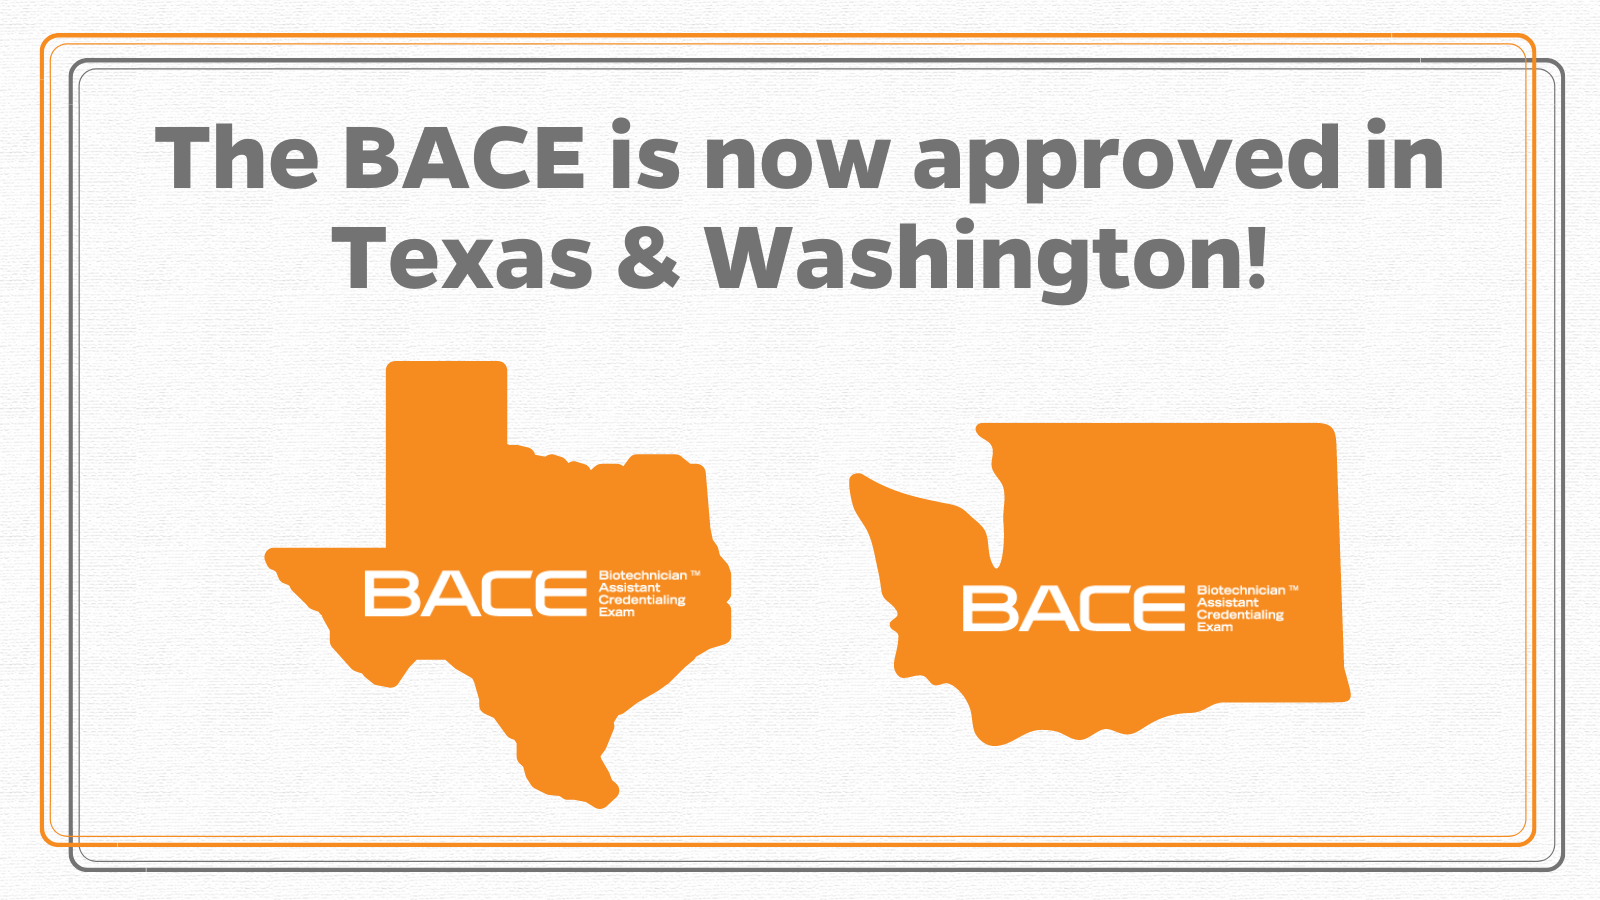 Line art of TX and WA with the text "The BACE is now approved in Texas & Washtington!"